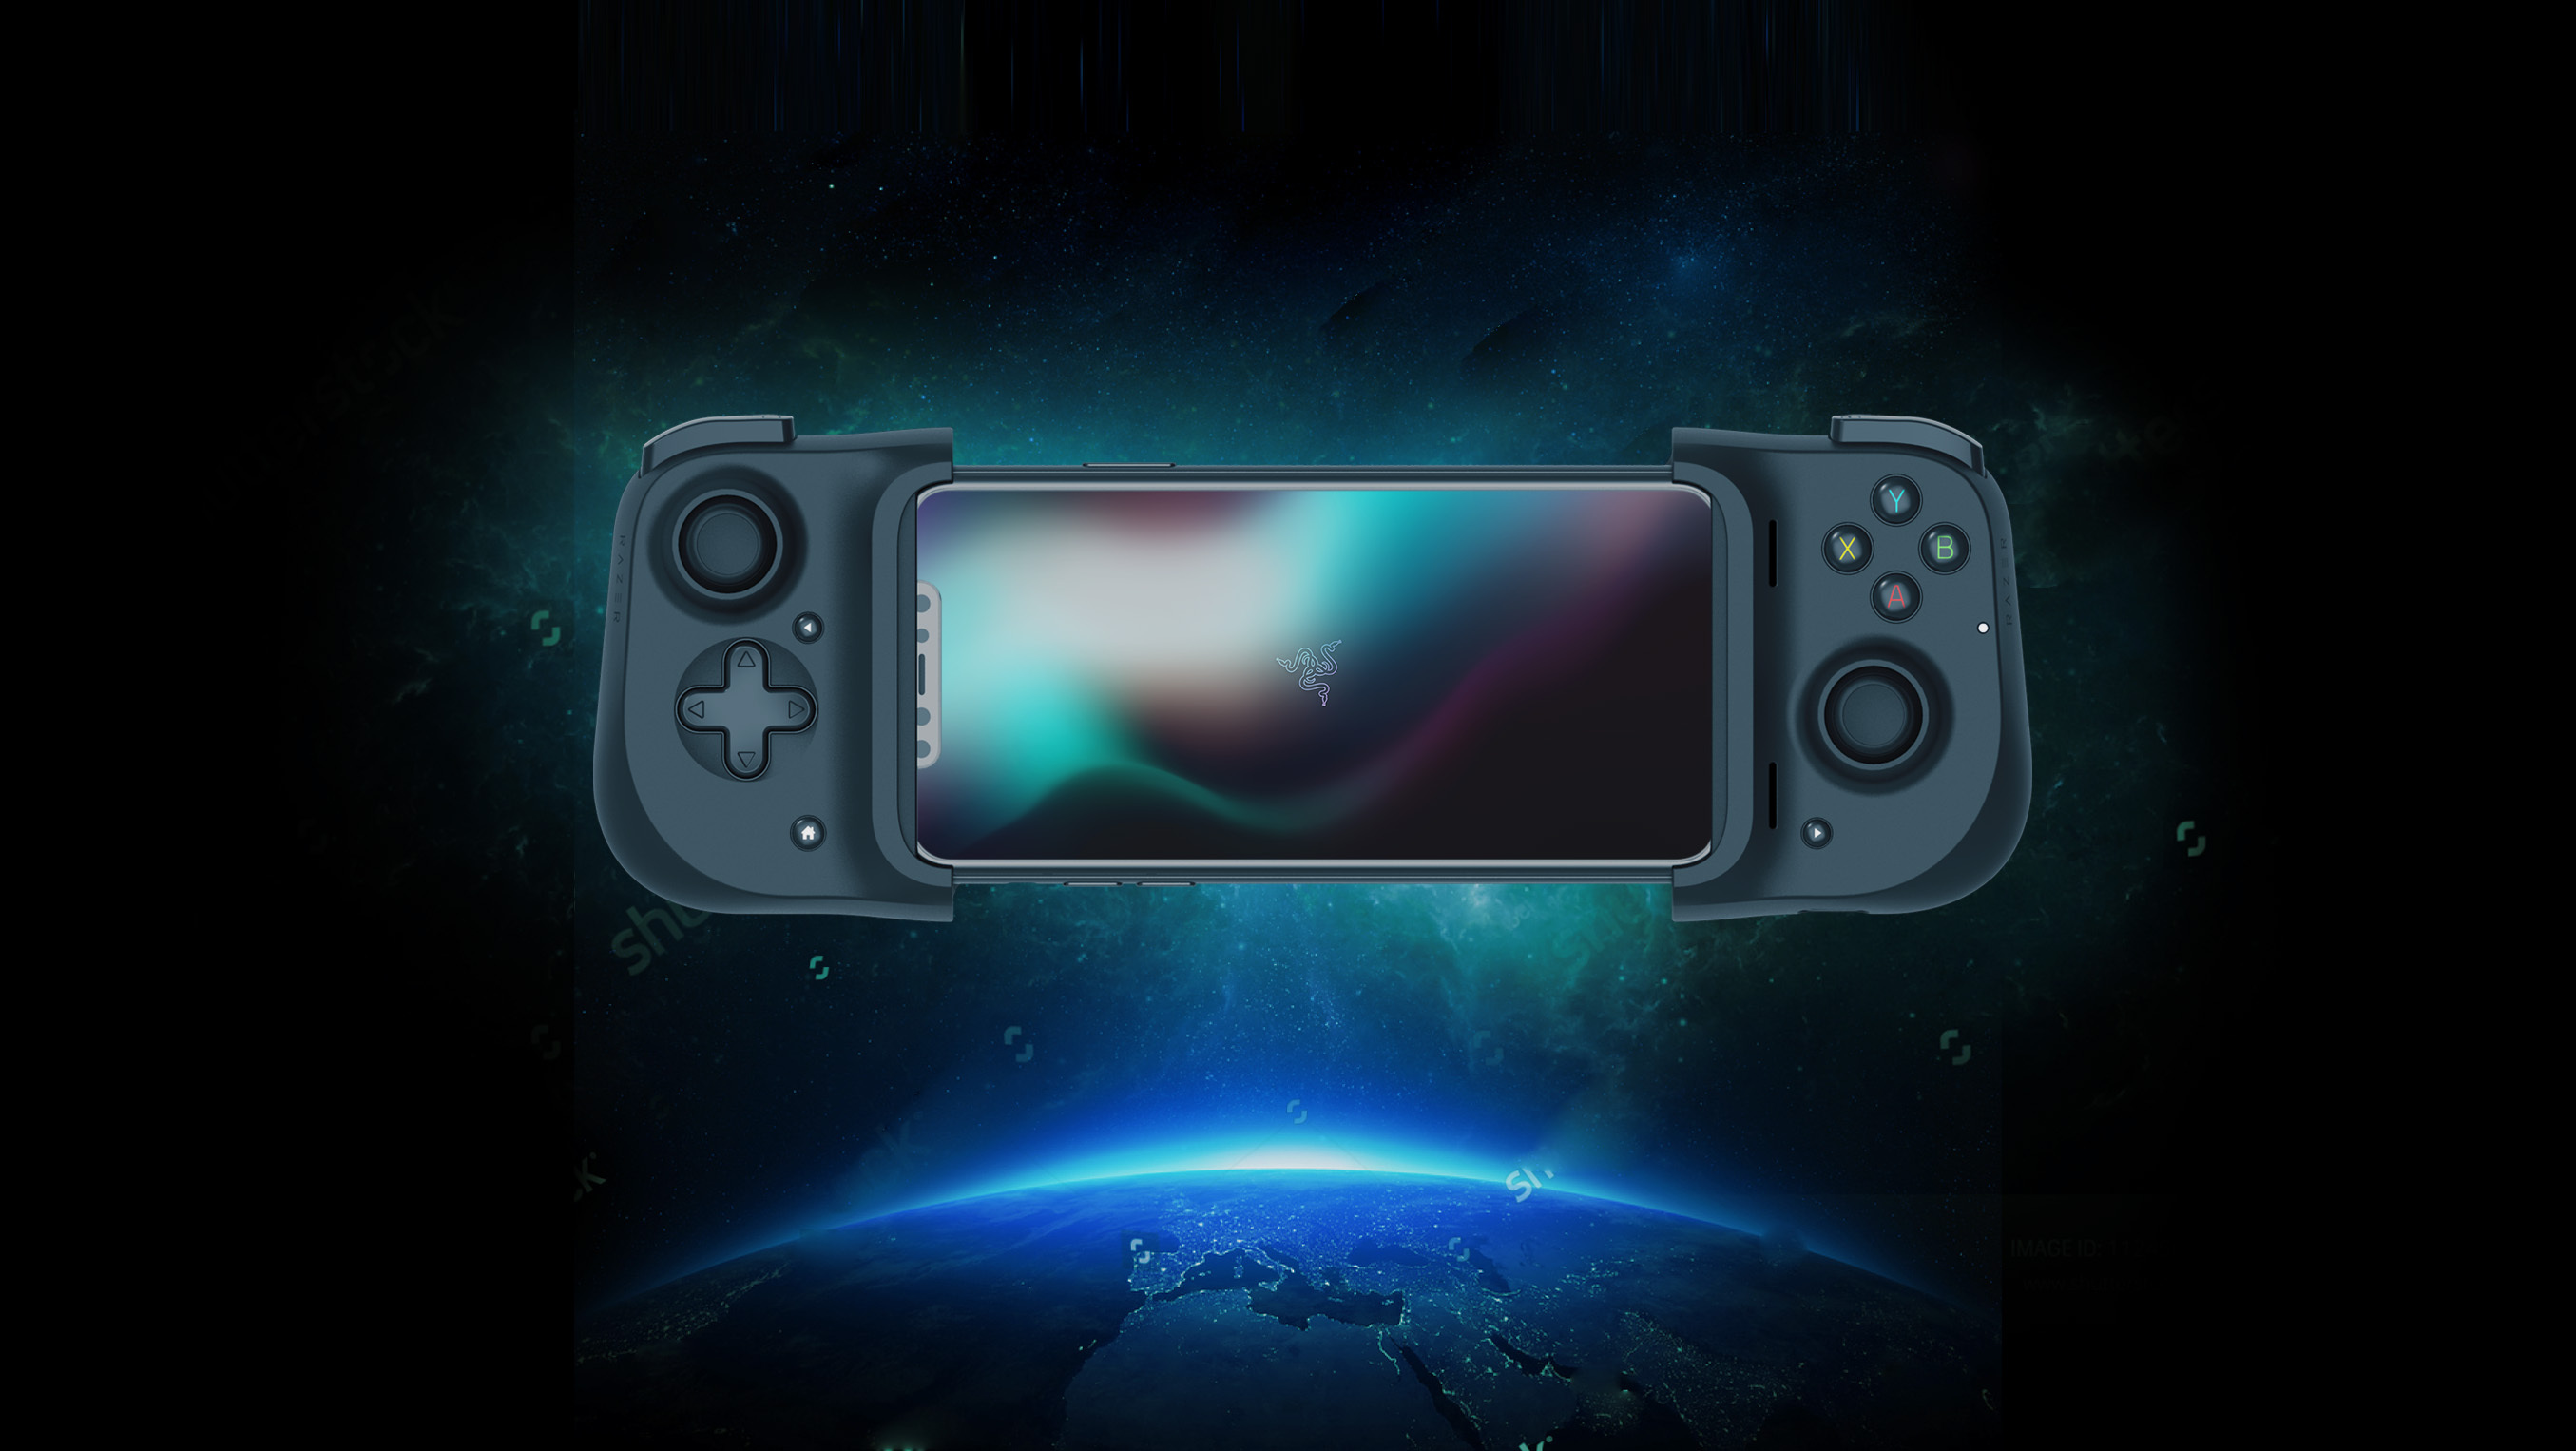 For Southeast Asia) PlayStation's first Remote Play dedicated